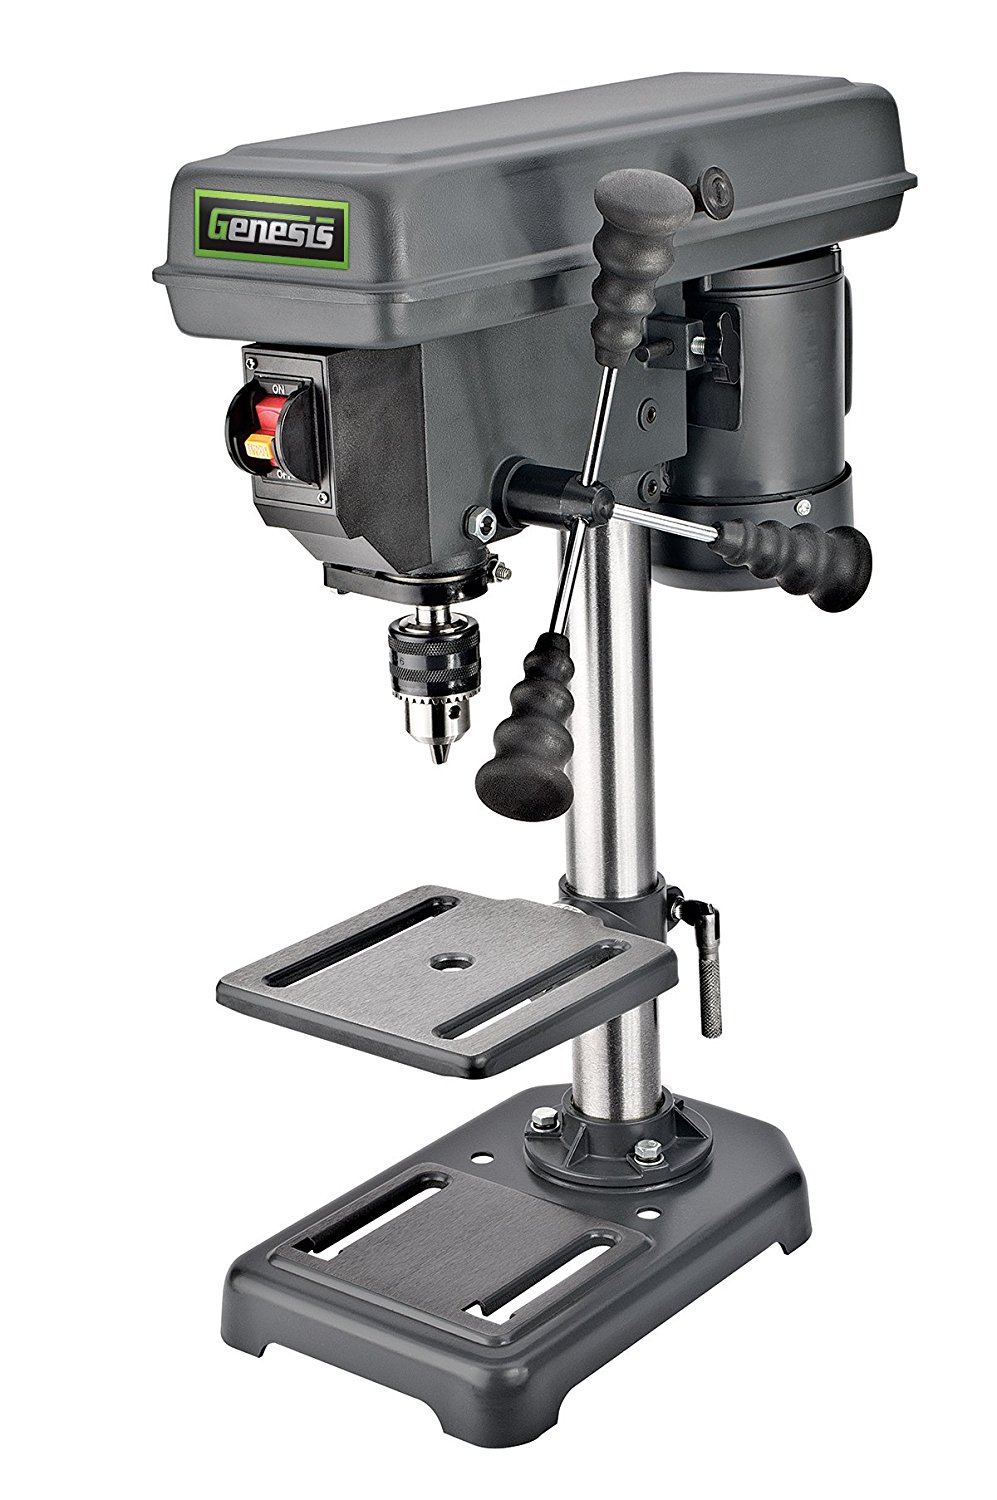 Genesis GDP805P 8 In. 5-Speed 2.6 Amp Drill Press with 1/2 In. Chuck & Tilt Table